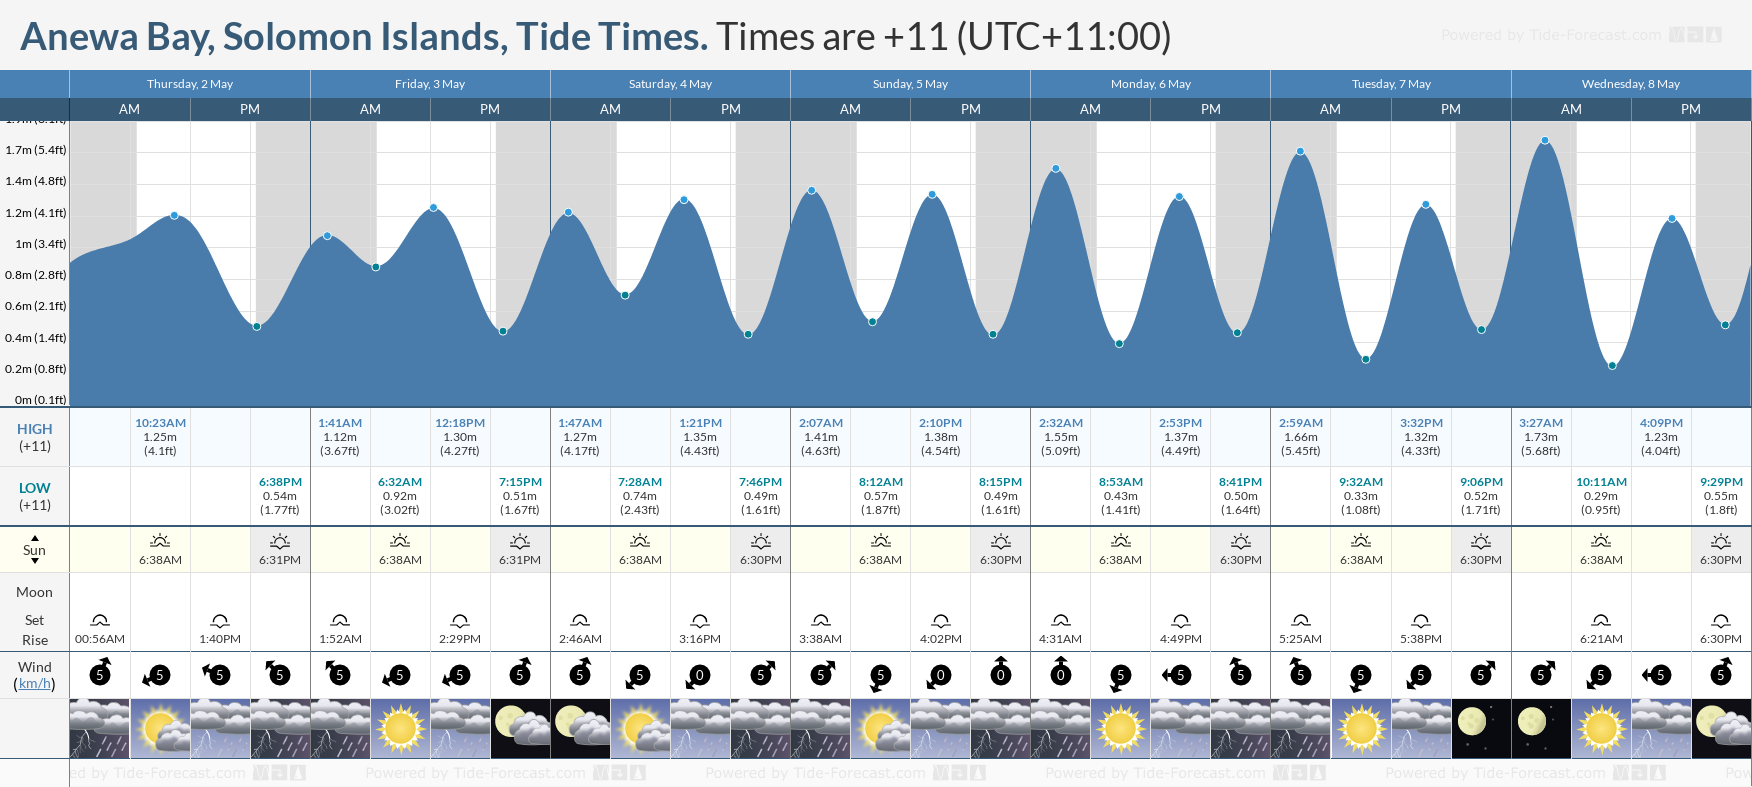 Anewa Bay, Solomon Islands Tide Chart including high and low tide tide times for the next 7 days